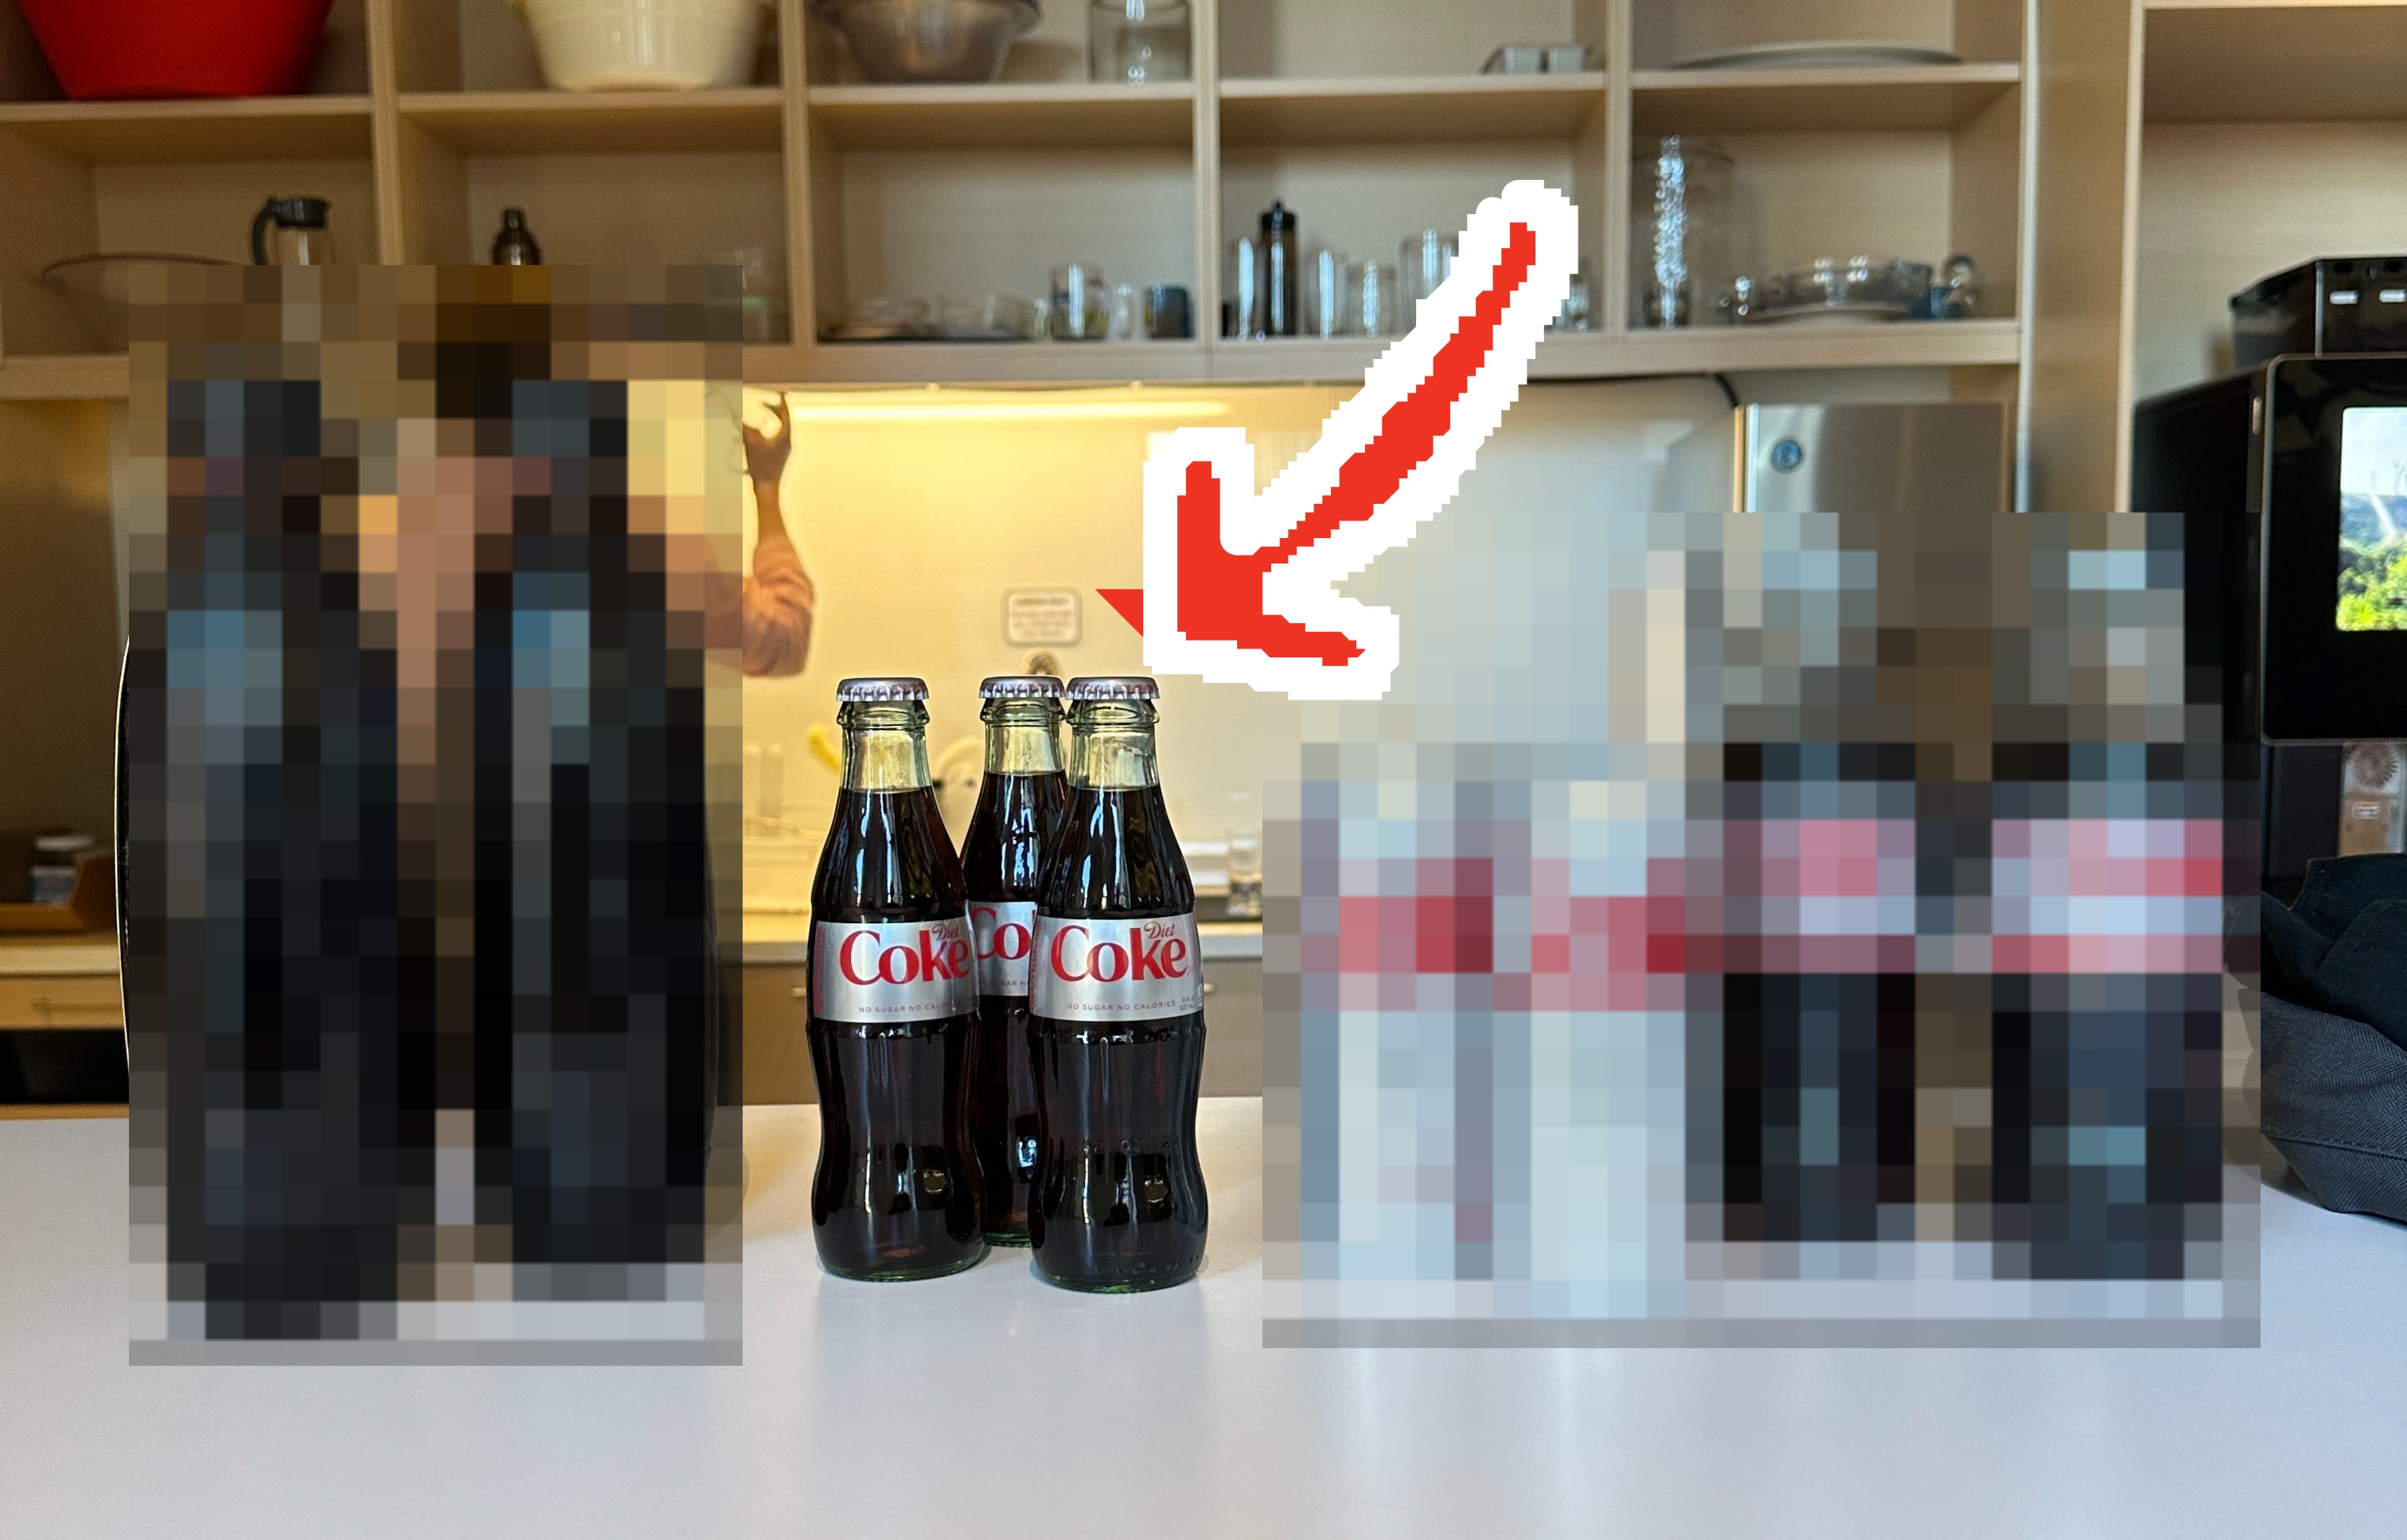 The four different types of Diet Coke lined up on a table, with an arrow pointing to the glass bottle